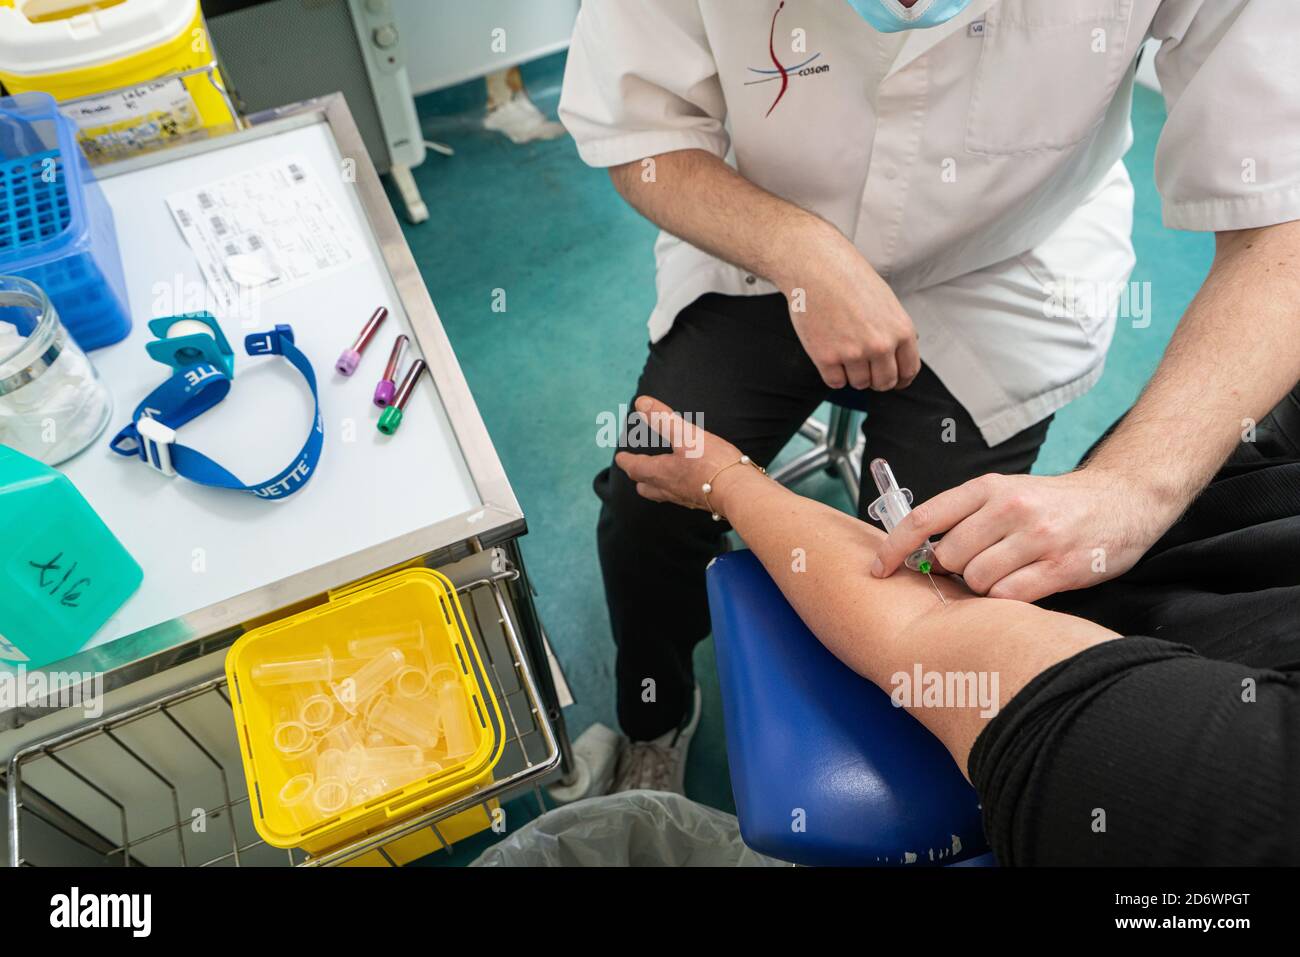 Blood test in a medical biology laboratory. Stock Photo